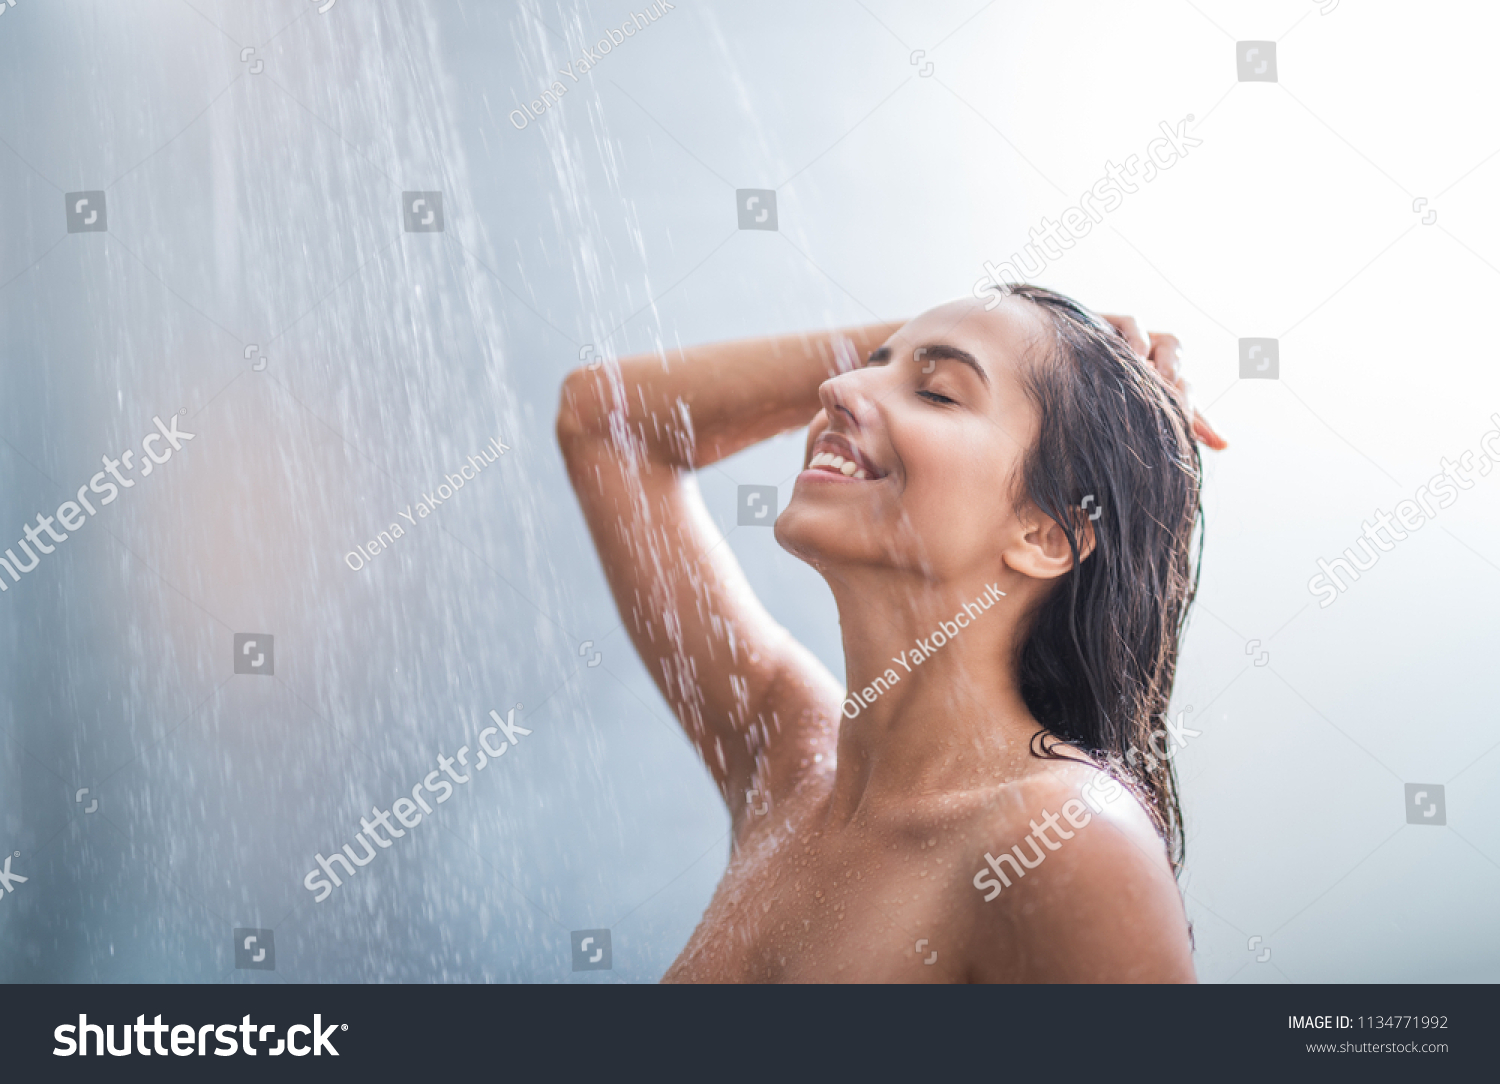 Side view happy woman washes body and hair under stream of hot water #1134771992